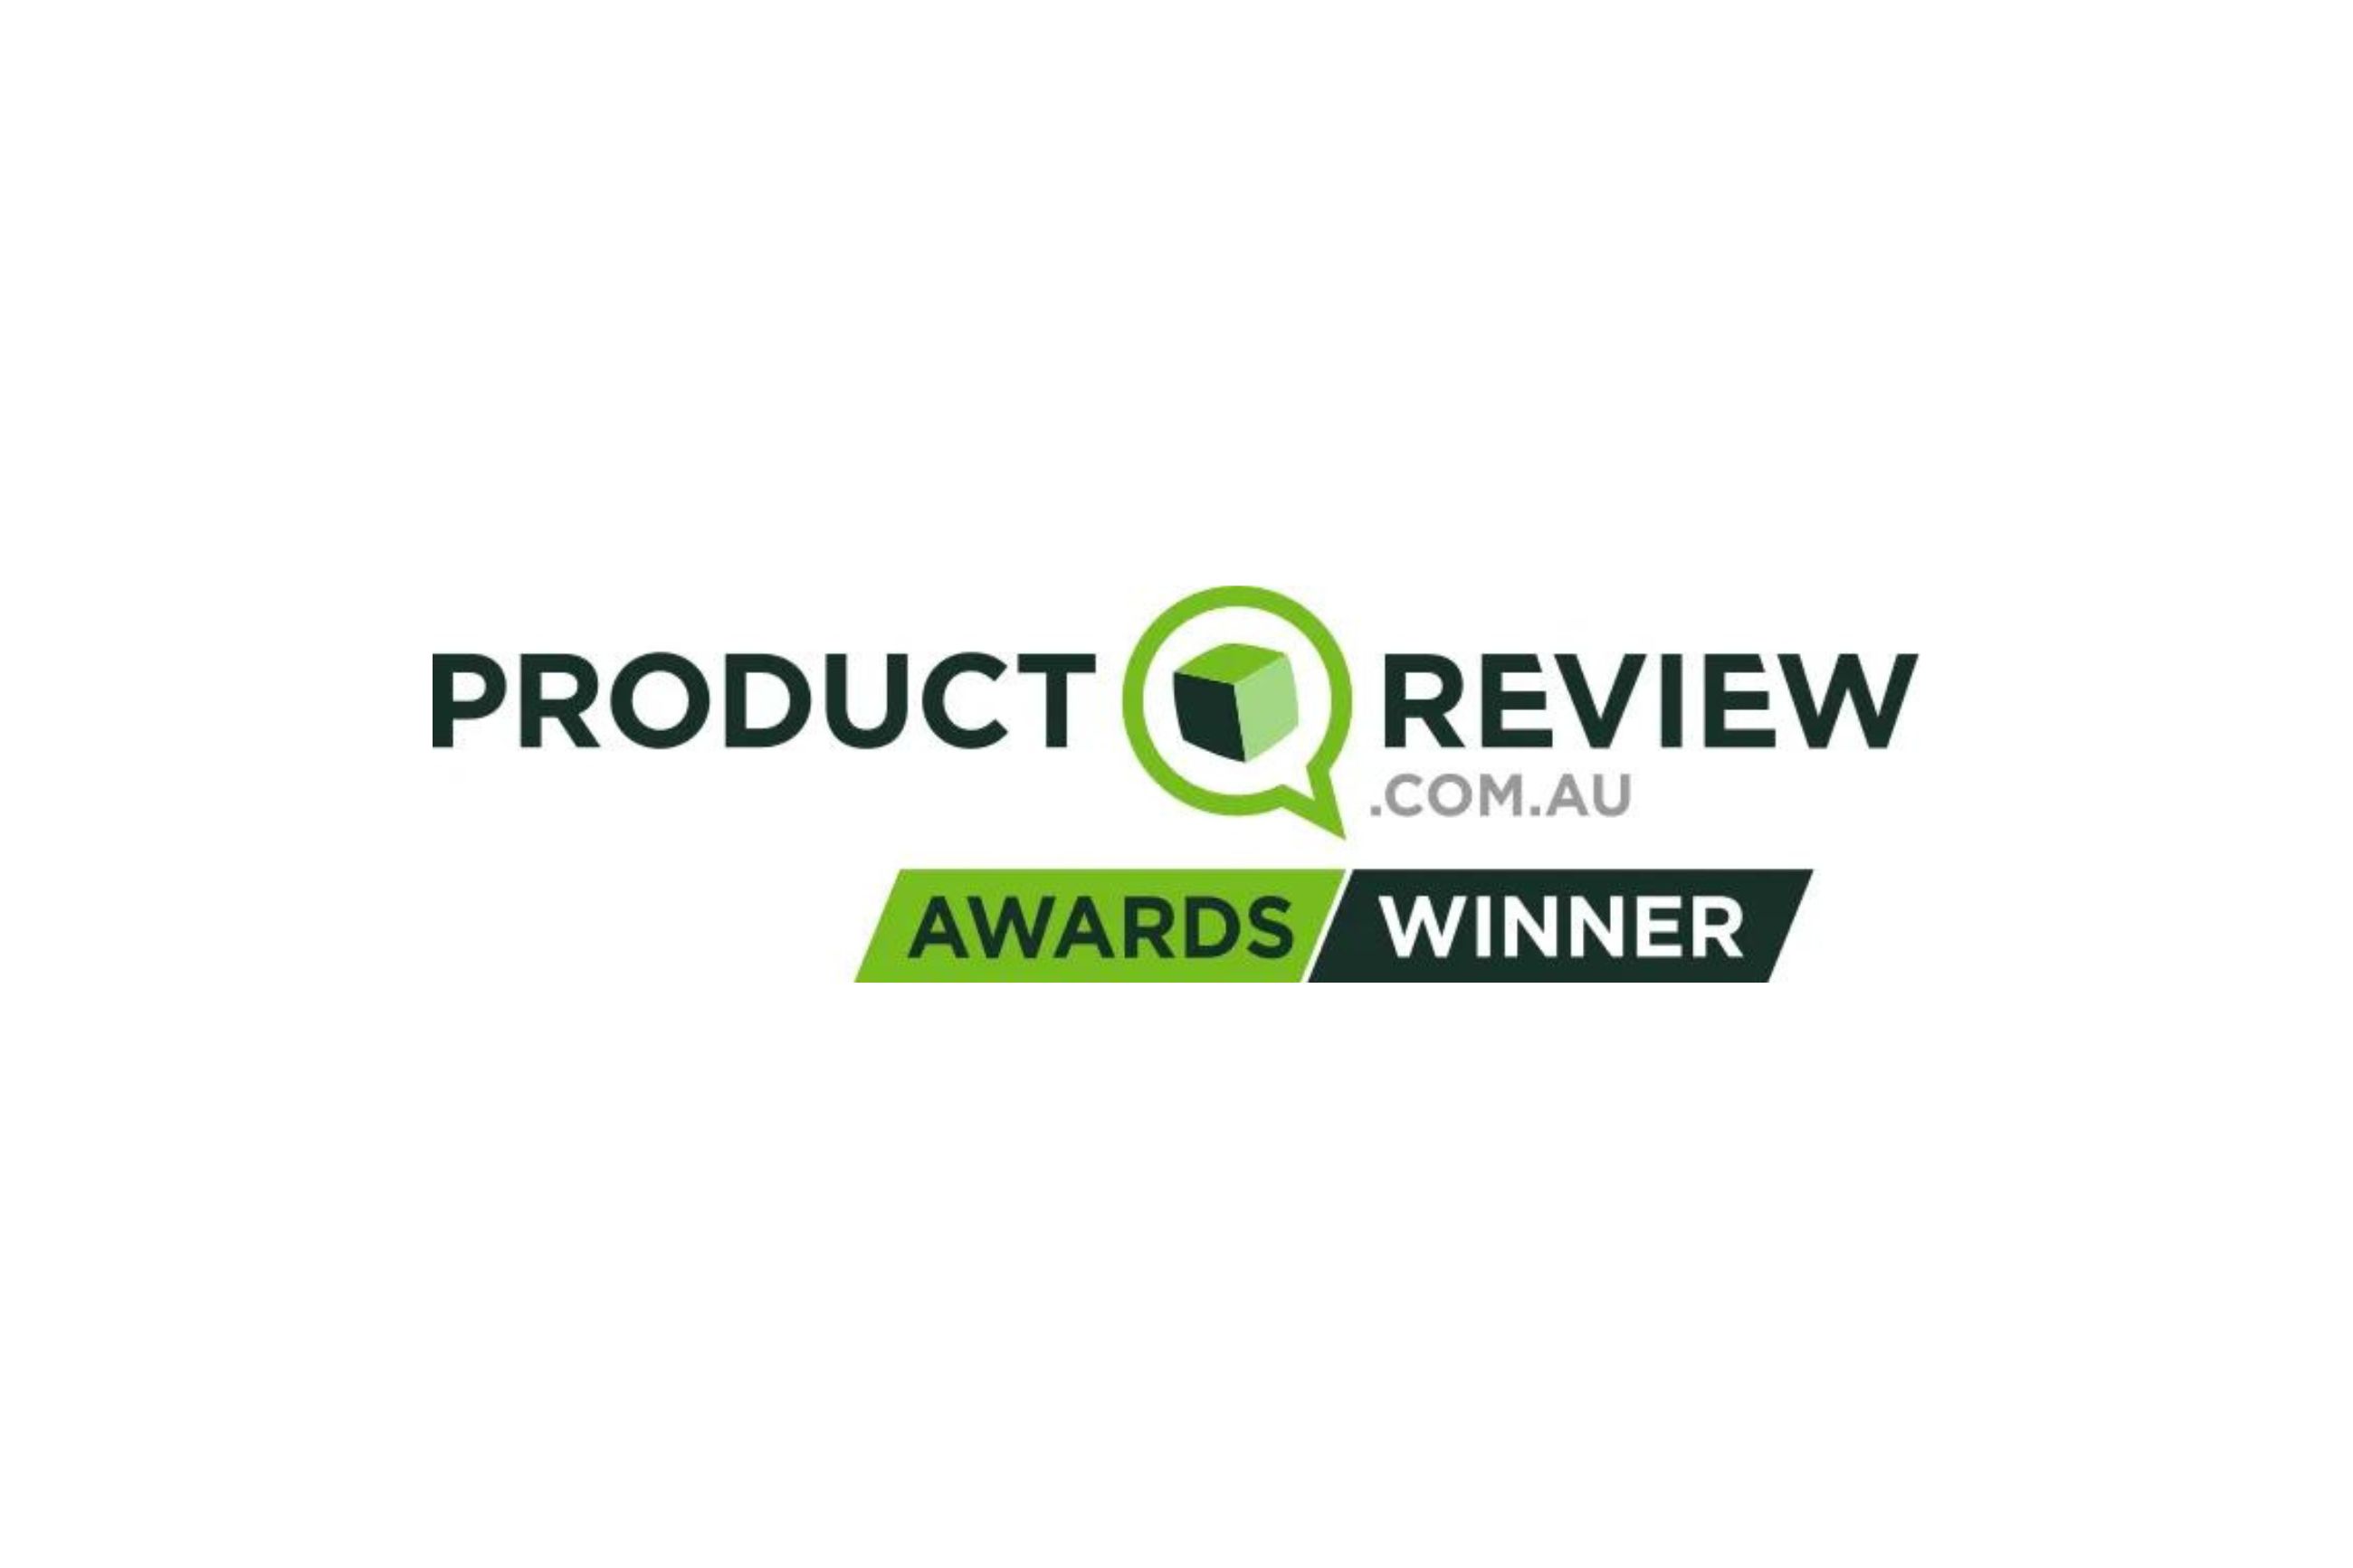 Image of Product Review Awards logo | Featured Image for the Award Winning Finance Brokers Blog.